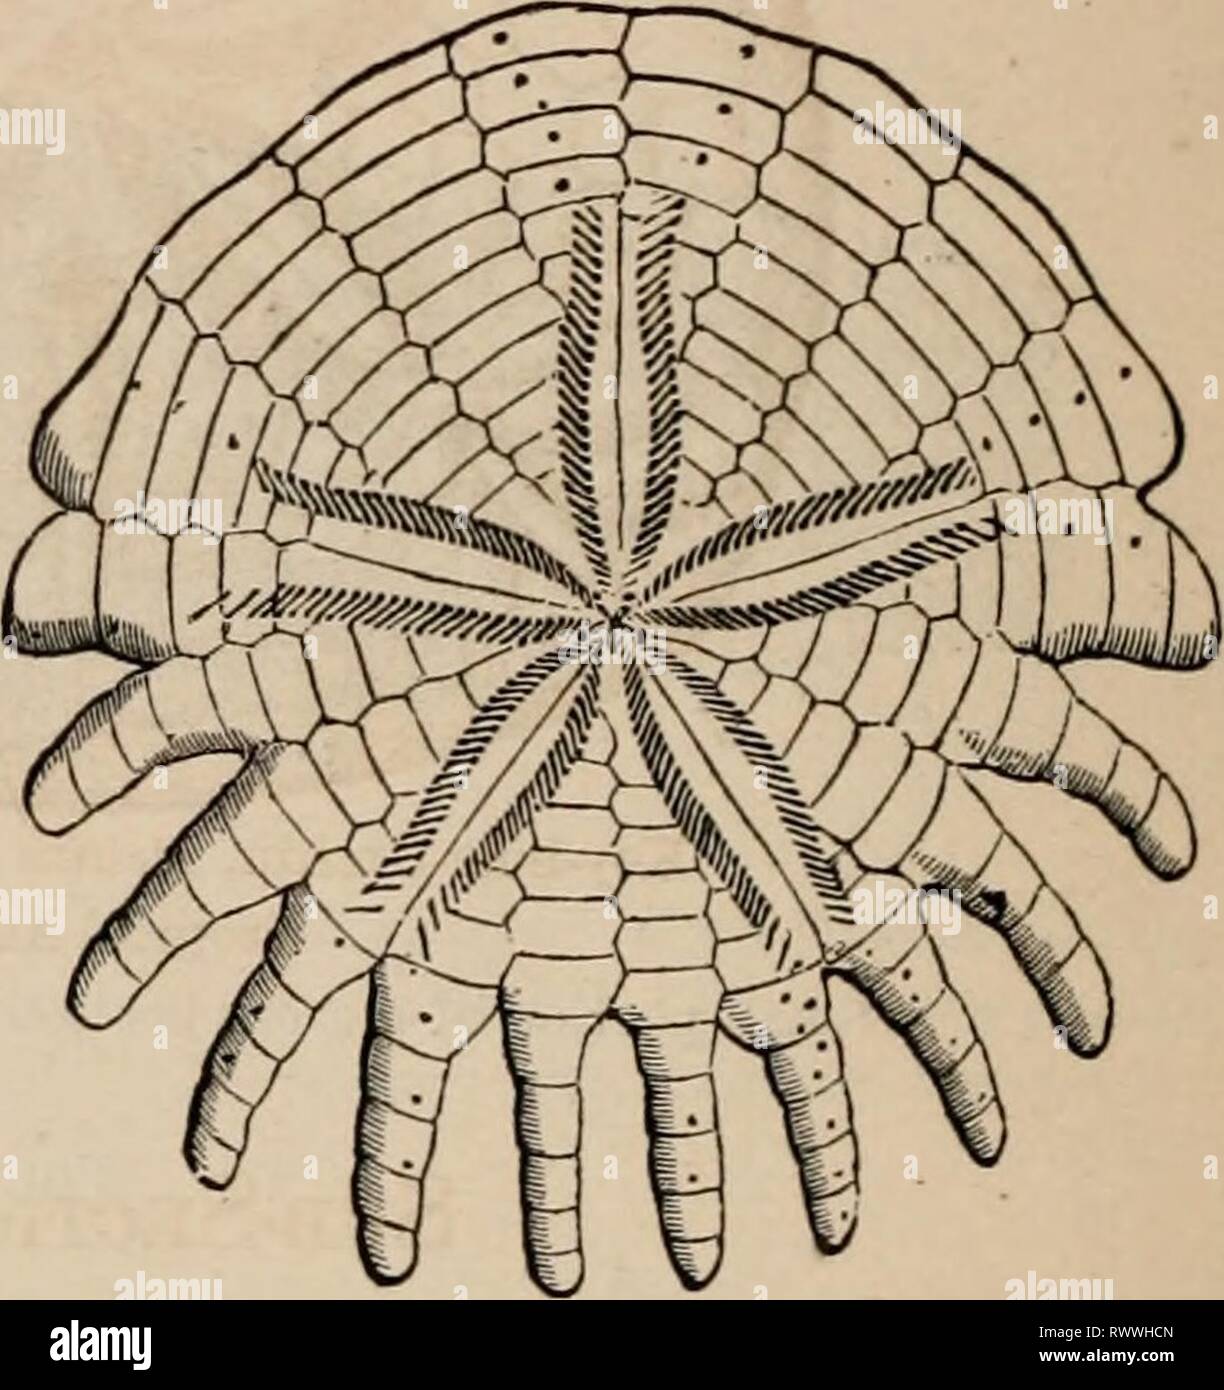 Elements of zoölogy  a Elements of zoölogy : a textbook elementsofzolo00tenn Year: c1875  448 HAUIATA : El'HINODERMATA. FIG. 678. these organs are not fully understood; but one of their uses is to aid in keeping the spines clean. The Echinoids represented by Figs. 673-675 have the mouth below and the vent above, and both central; and they have the ambulacra in live pairs continuous from the mouth to the vent, and so they are called the Regular Echi- noids. Besides these there are many kinds of Sea-ur- chins—mostly much flat- tened, and in many cases elongated in one direc- tion more than in th Stock Photo